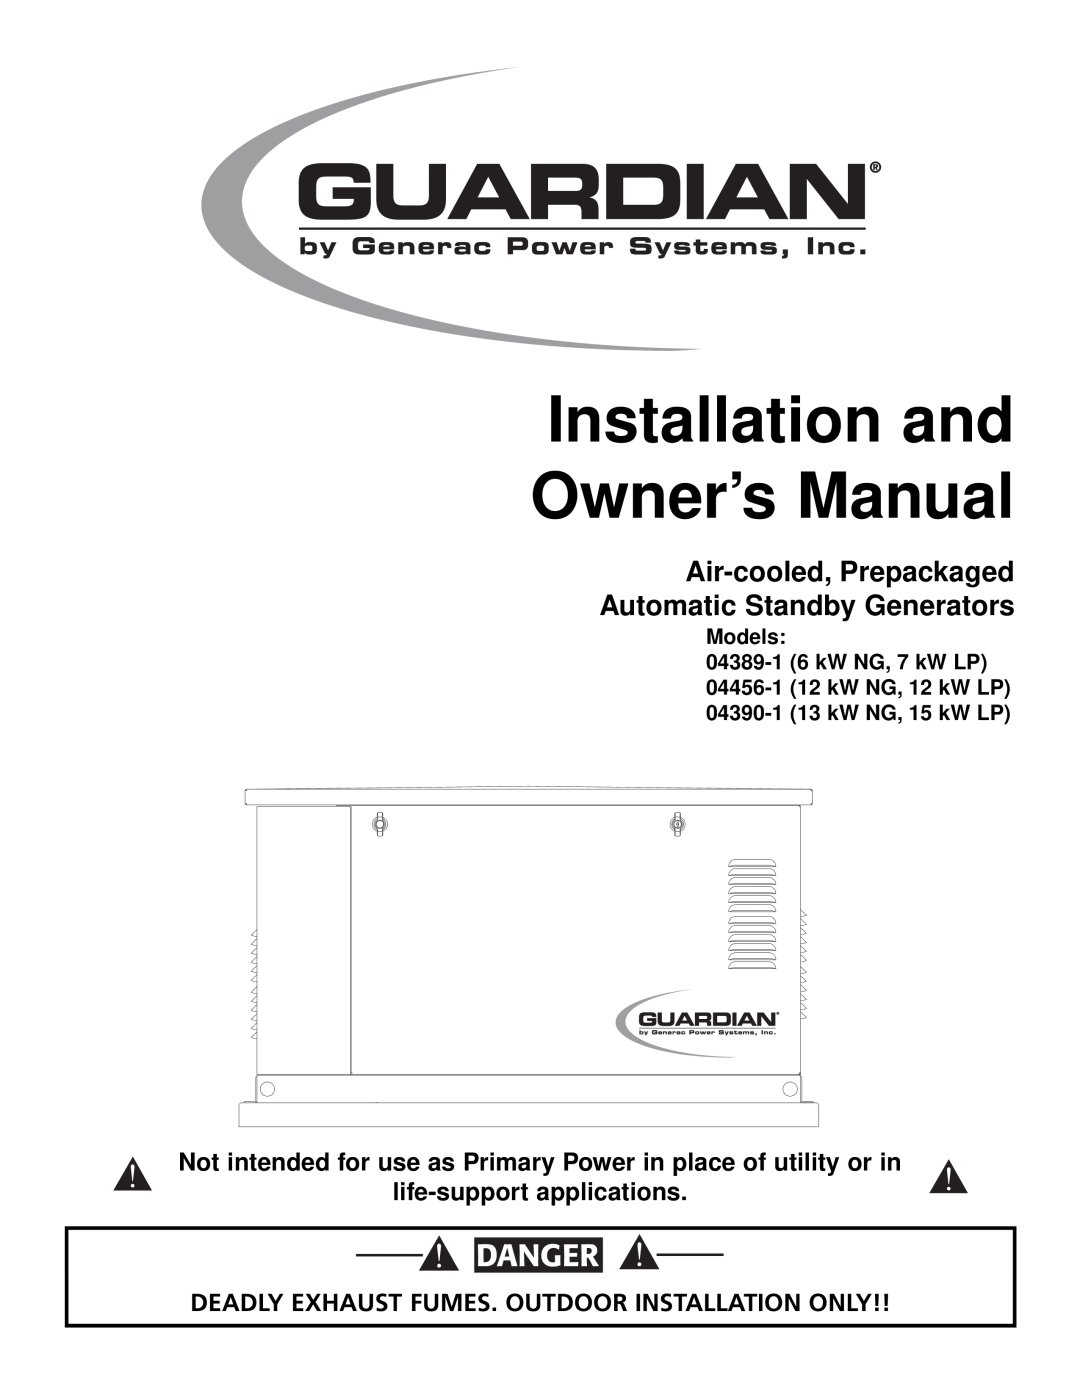 Generac Power Systems 04456-1 owner manual Danger, Air-cooled,Prepackaged, Automatic Standby Generators, Generac R 